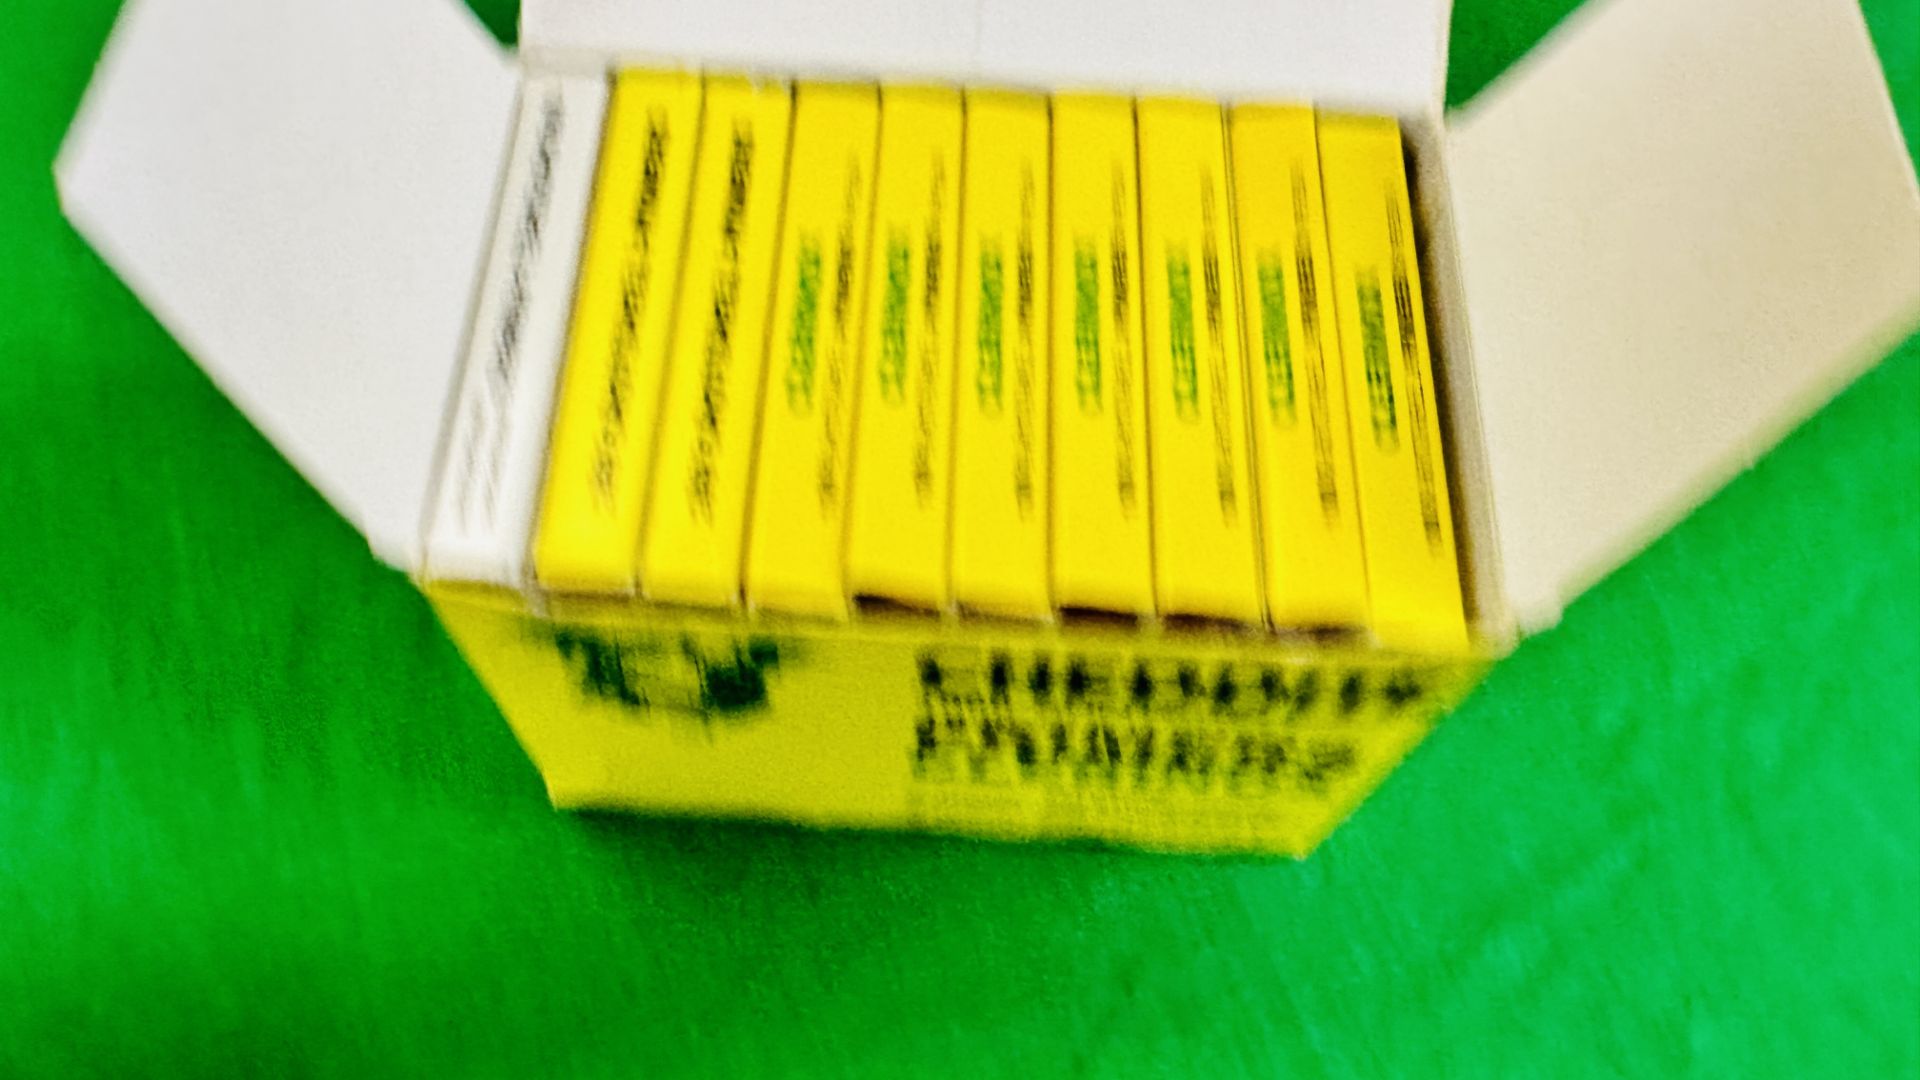 1000 CHEDDITE CLERINOX 209 PRIMERS - (TO BE COLLECTED IN PERSON BY LICENCE HOLDER ONLY - NO POSTAGE - Image 4 of 5